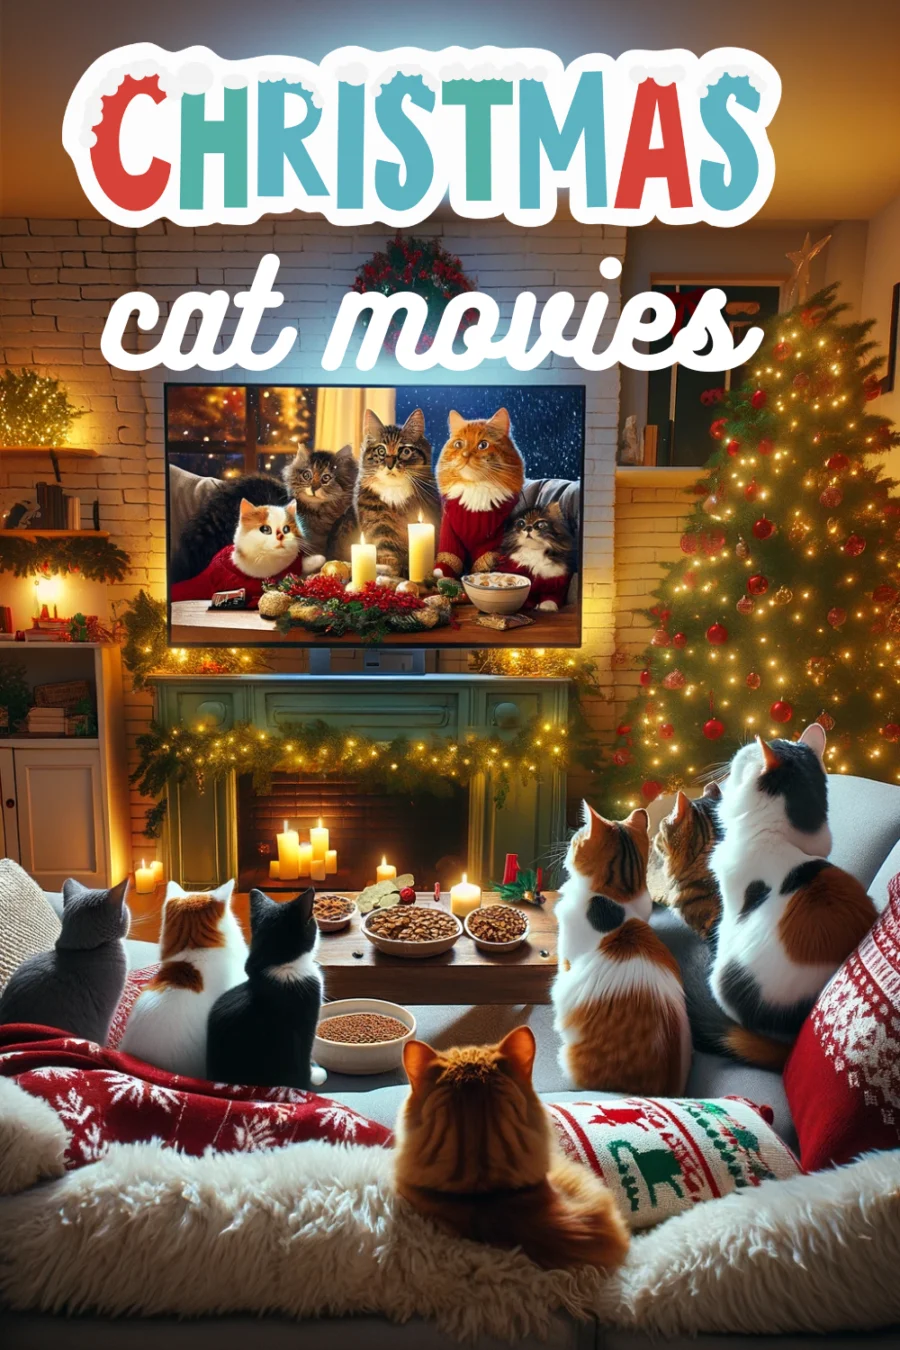 A charming living room scene during Christmas, with several cats of different breeds and colors, cozily gathered on a plush sofa, watching a Christmas movie on a big screen TV. The room is festively decorated with Christmas lights, a beautifully adorned Christmas tree in the corner, and holiday-themed decorations. The cats are intently focused on the screen, showing expressions of curiosity and delight. 